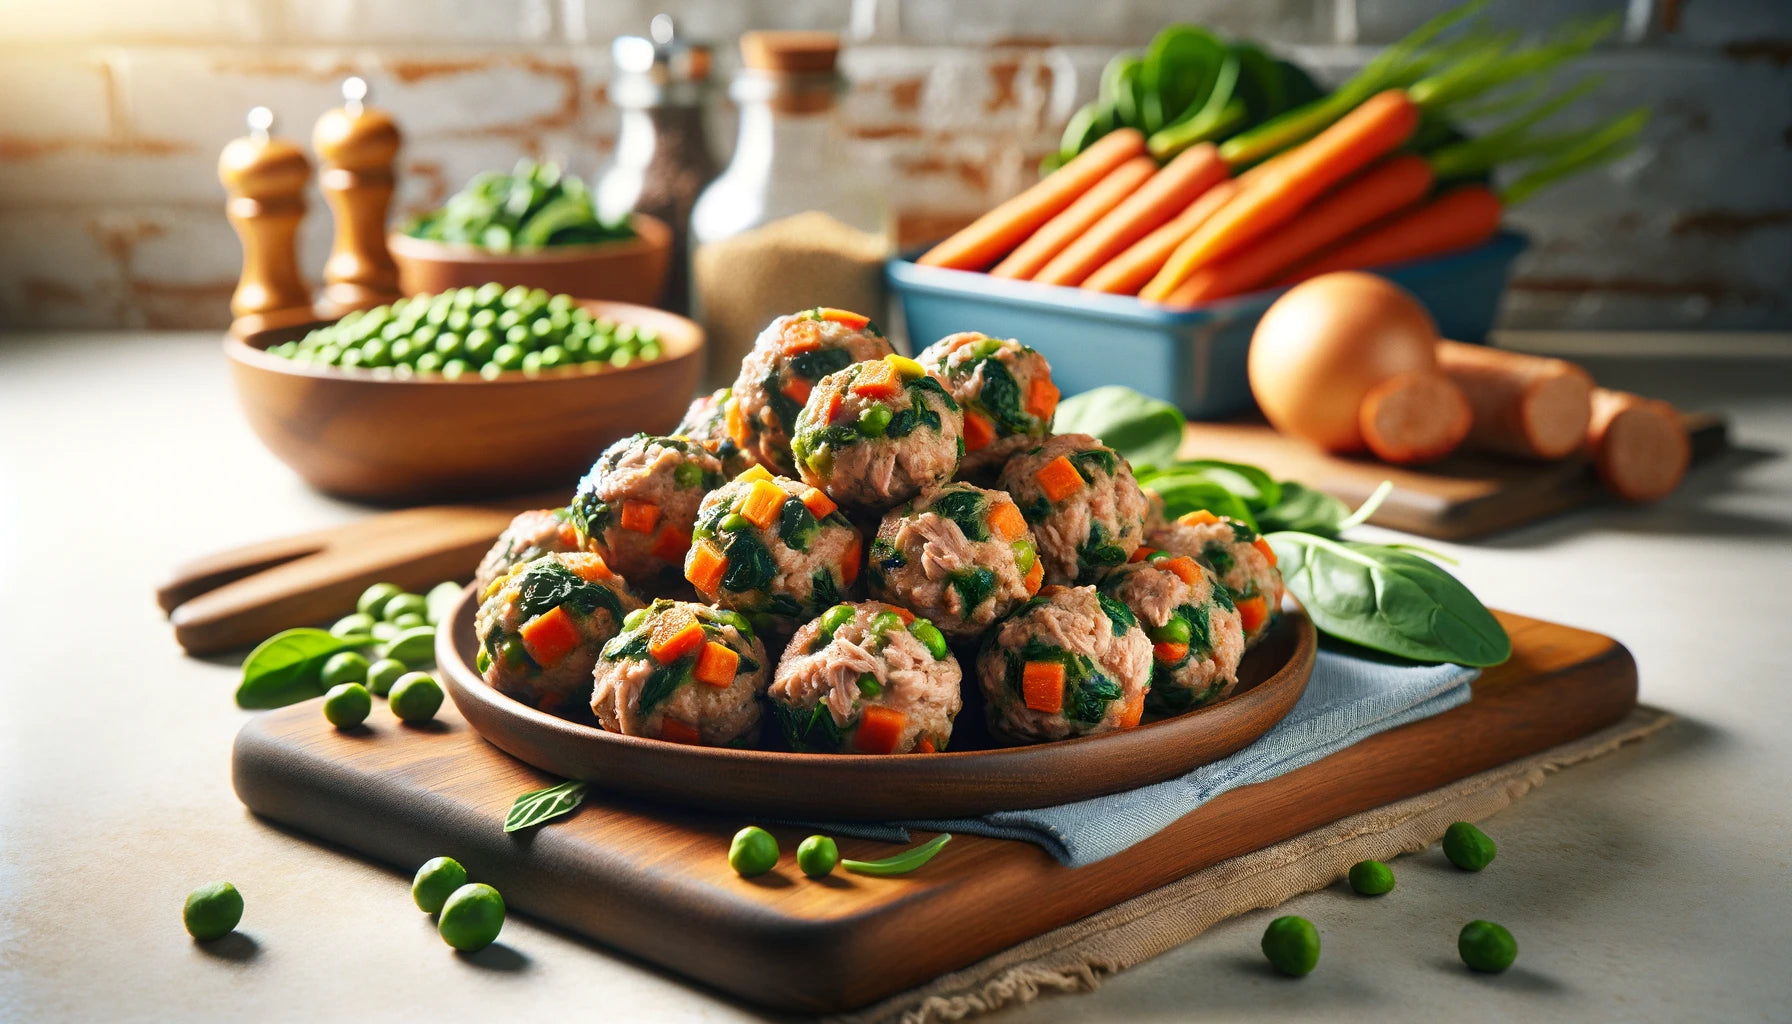 Turkey Veggie Meatballs illustrating a wholesome and protein-rich meal for dogs.